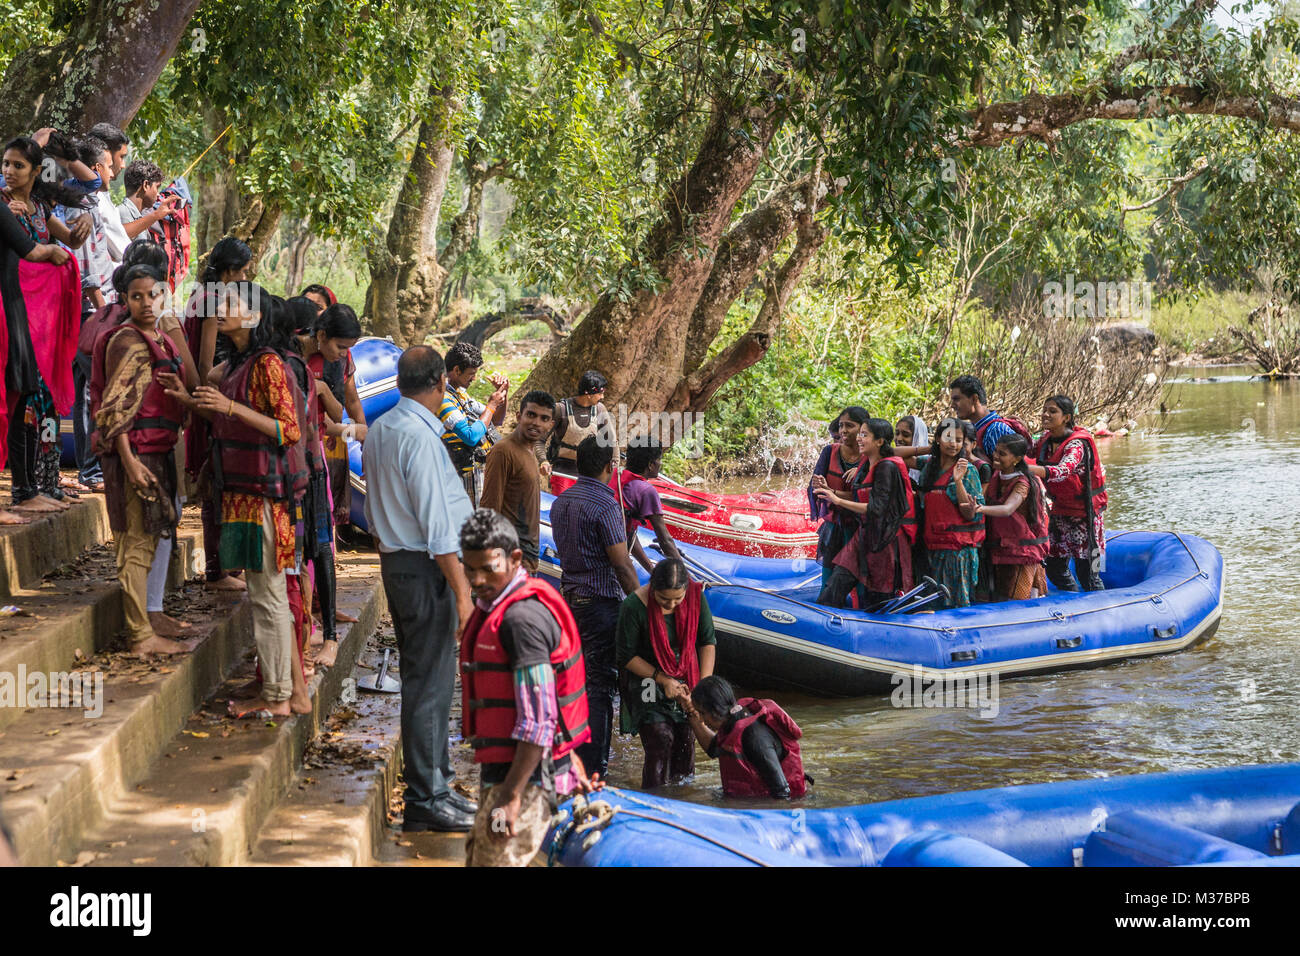 Coorg, India - October 29, 2013: Water rafting in Kaveri River. Dinghy sloops land at stairway on shore. Full of young college-aged girls and boys hav Stock Photo